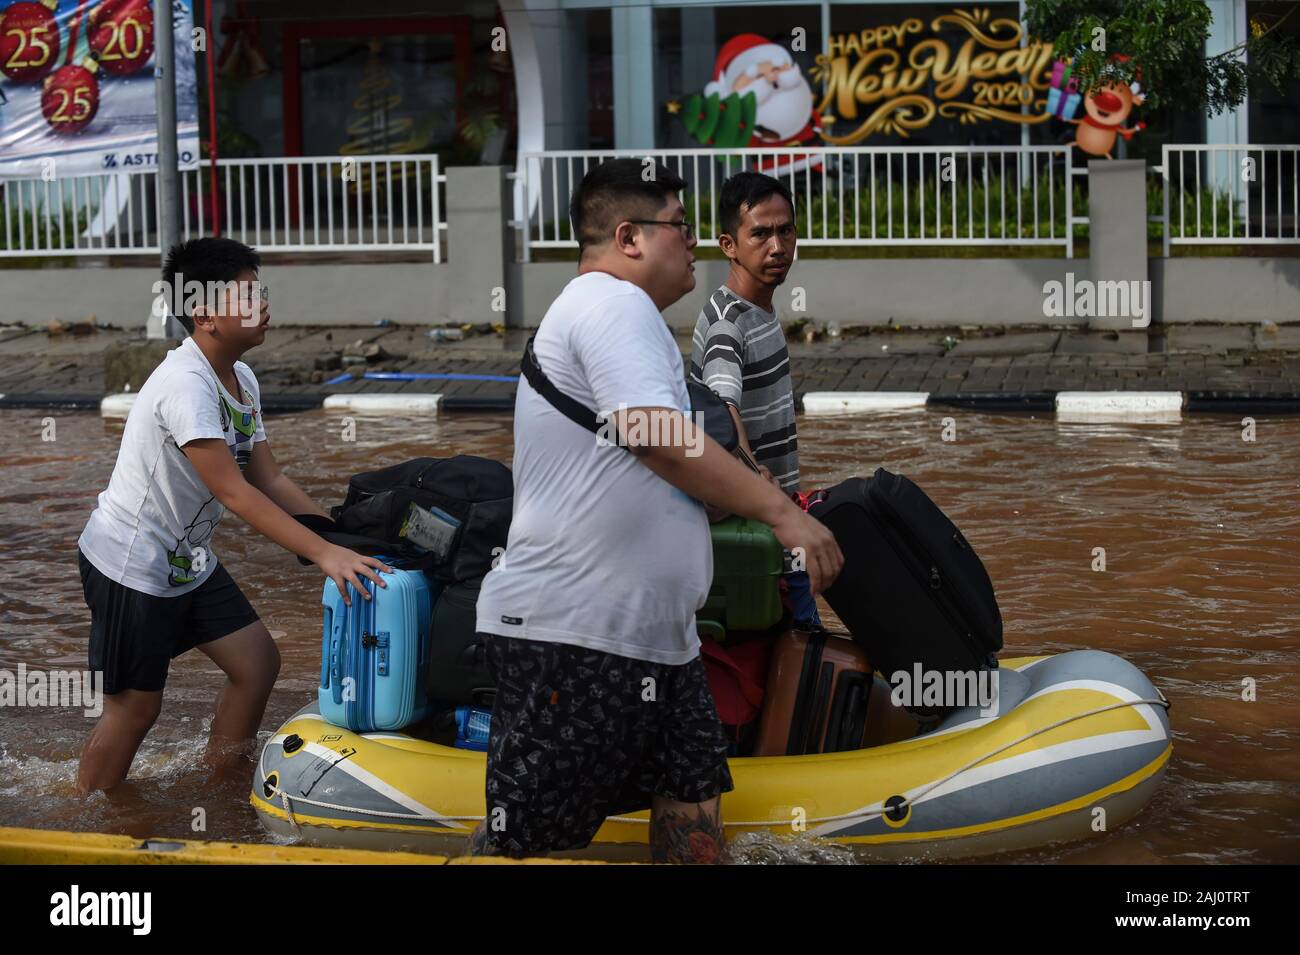 Jakarta, Indonesia. 2nd Jan, 2020. People transfer their belongings by rubber boat as they wade through a flooded street in Jakarta, Indonesia, Jan. 2, 2020. In Jakarta, evacuation of the flood-affected persons persisted as waters still submerged several parts of the city, and six people were reported dead in the city, said M. Ridwan, spokesman for a disaster agency in Jakarta. Credit: Agung Kuncahya B./Xinhua/Alamy Live News Stock Photo